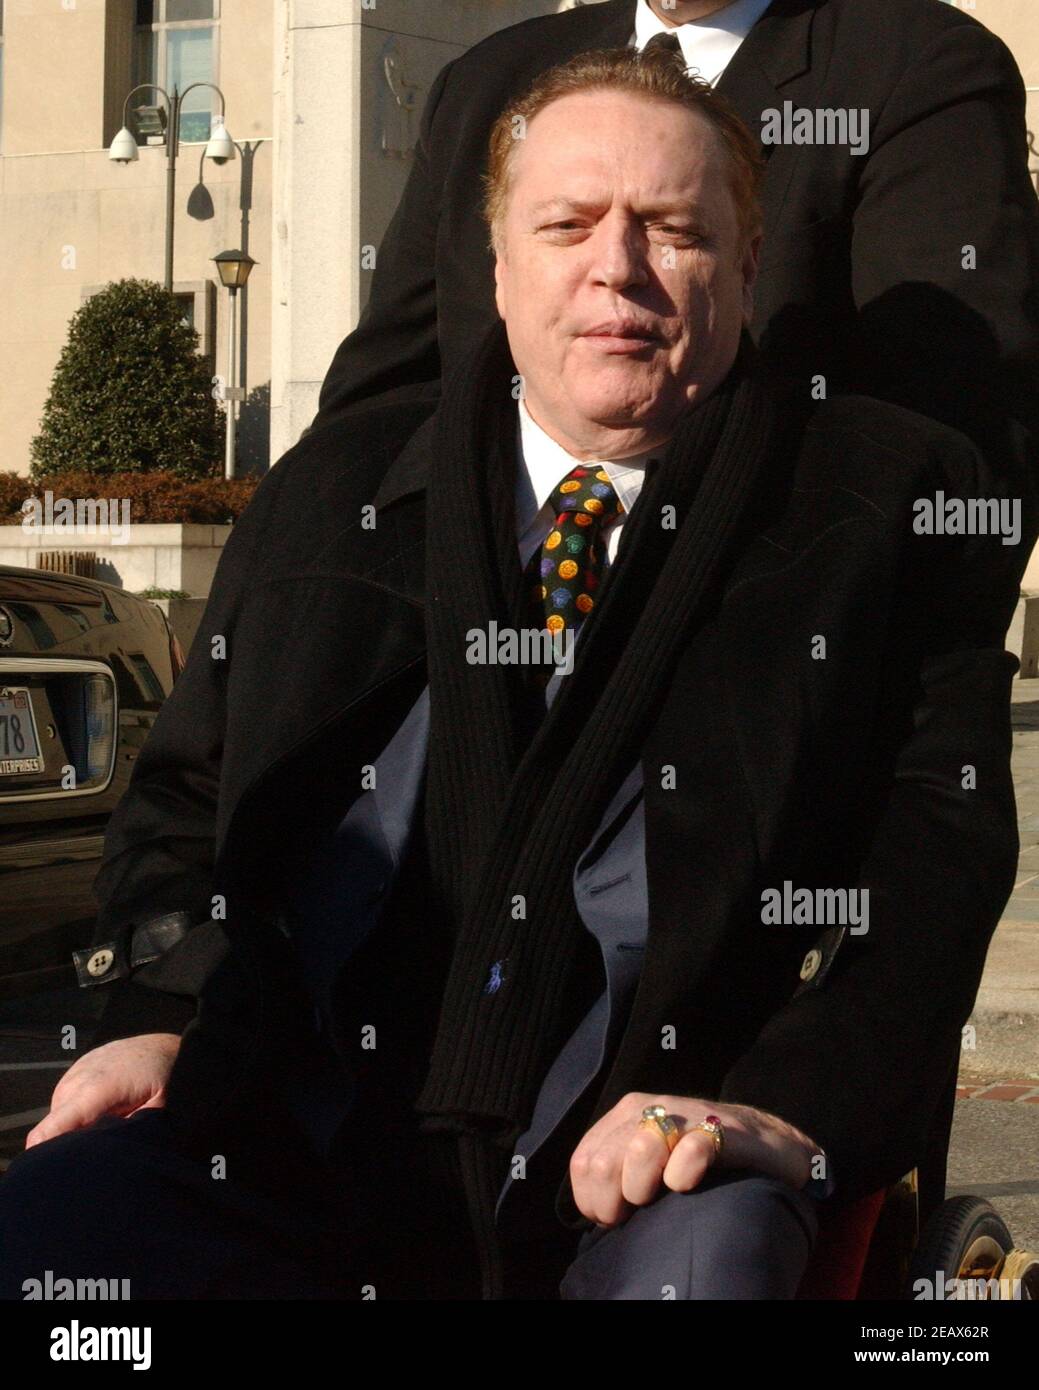 Washington, DC - January 4, 2002 -- Hustler Magazine publisher Larry Flynt appears at United States District Court in Washington, DC to plead his case against the United States Department of Defense. Flynt wants the court to order the battlefields in Afghanistan opened to the media.Credit: Ron Sachs/CNP | usage worldwide Stock Photo